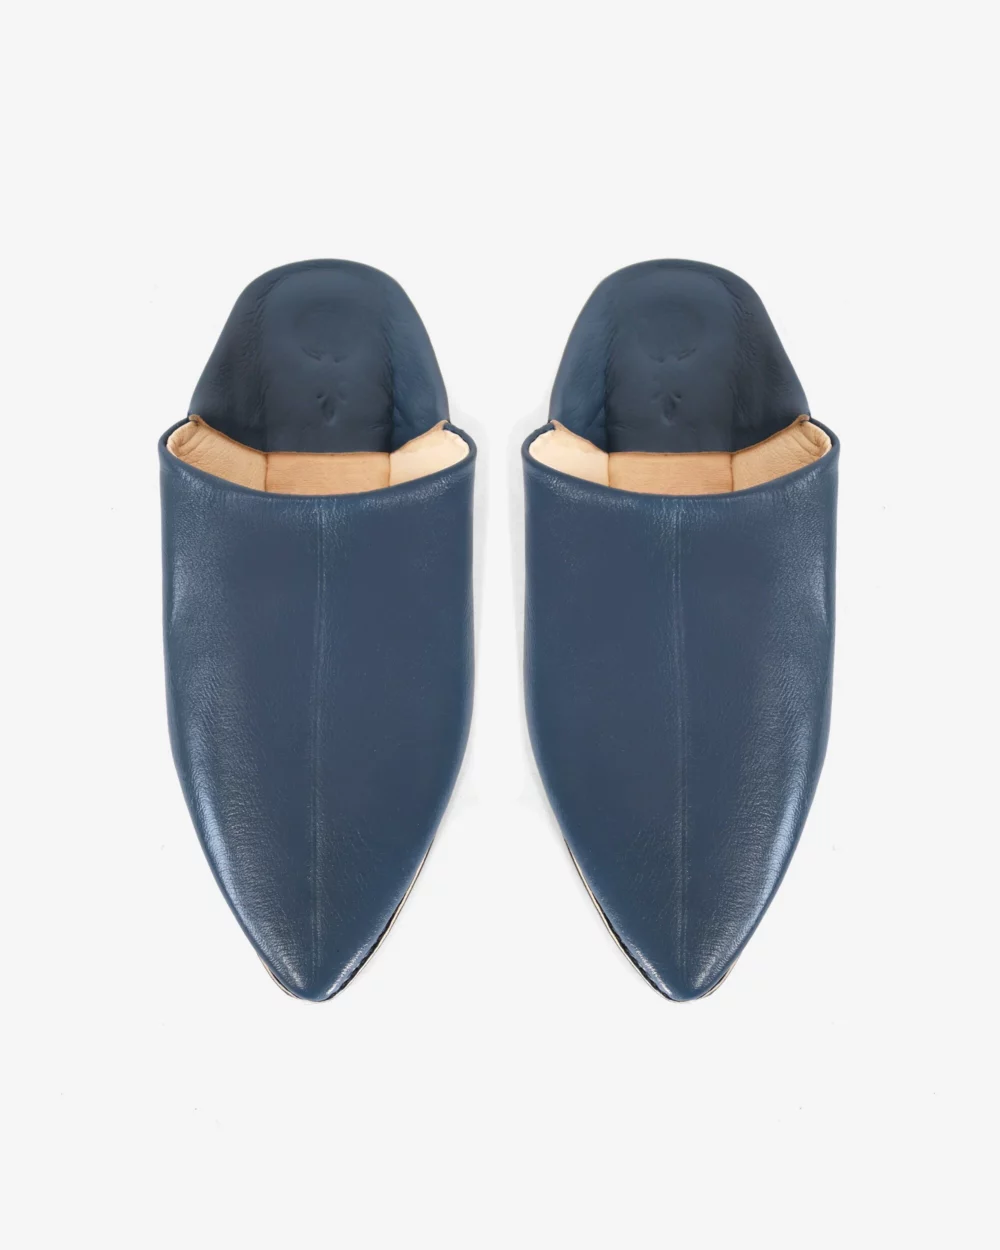 Leather Moroccan Handmade Slippers